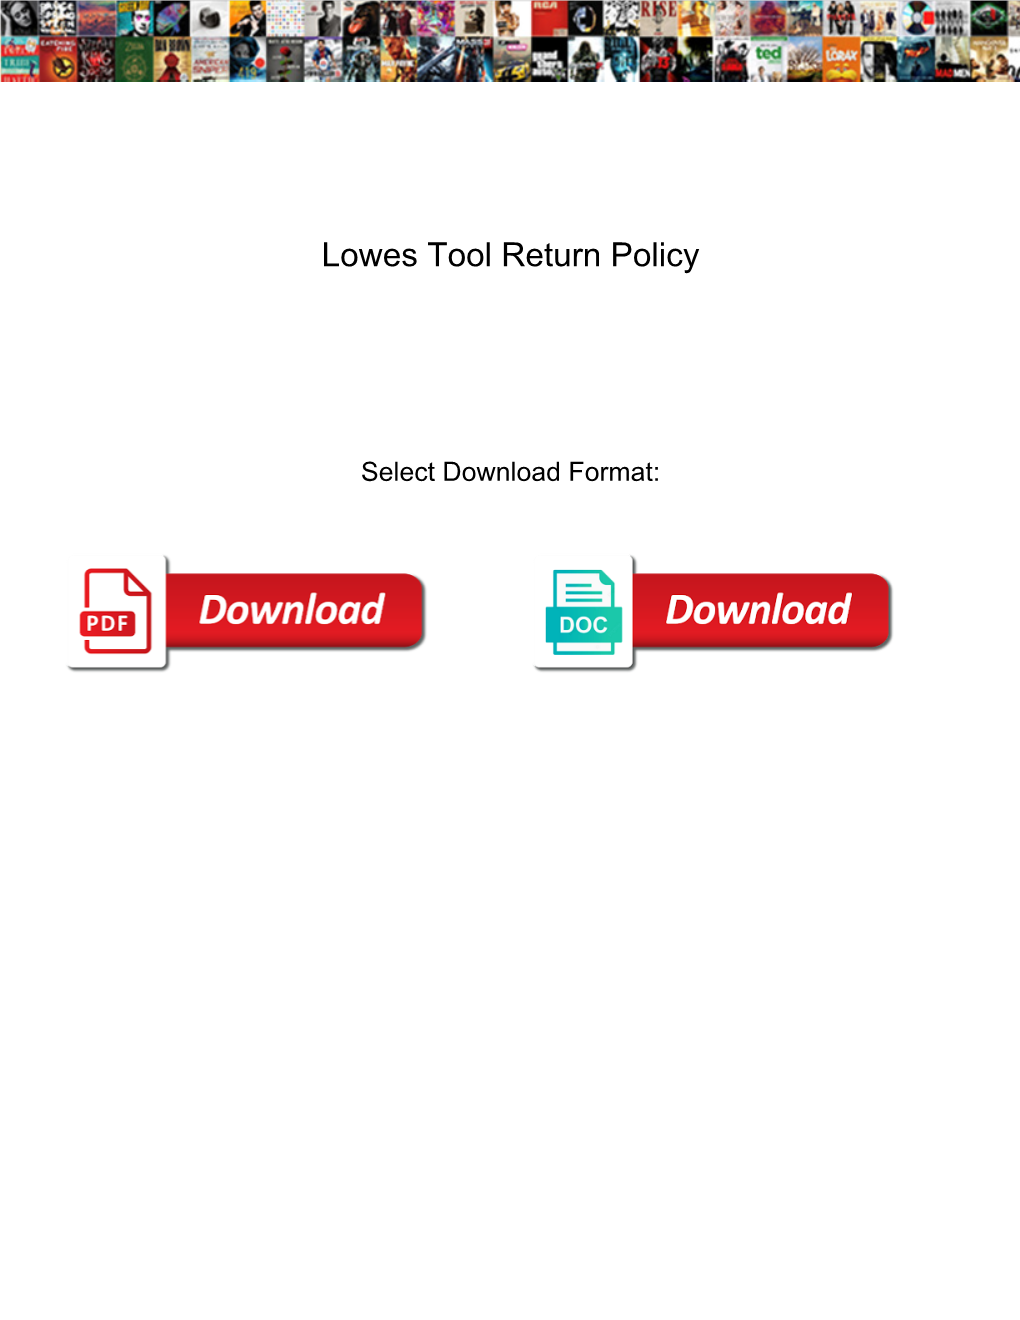 Lowes Tool Return Policy